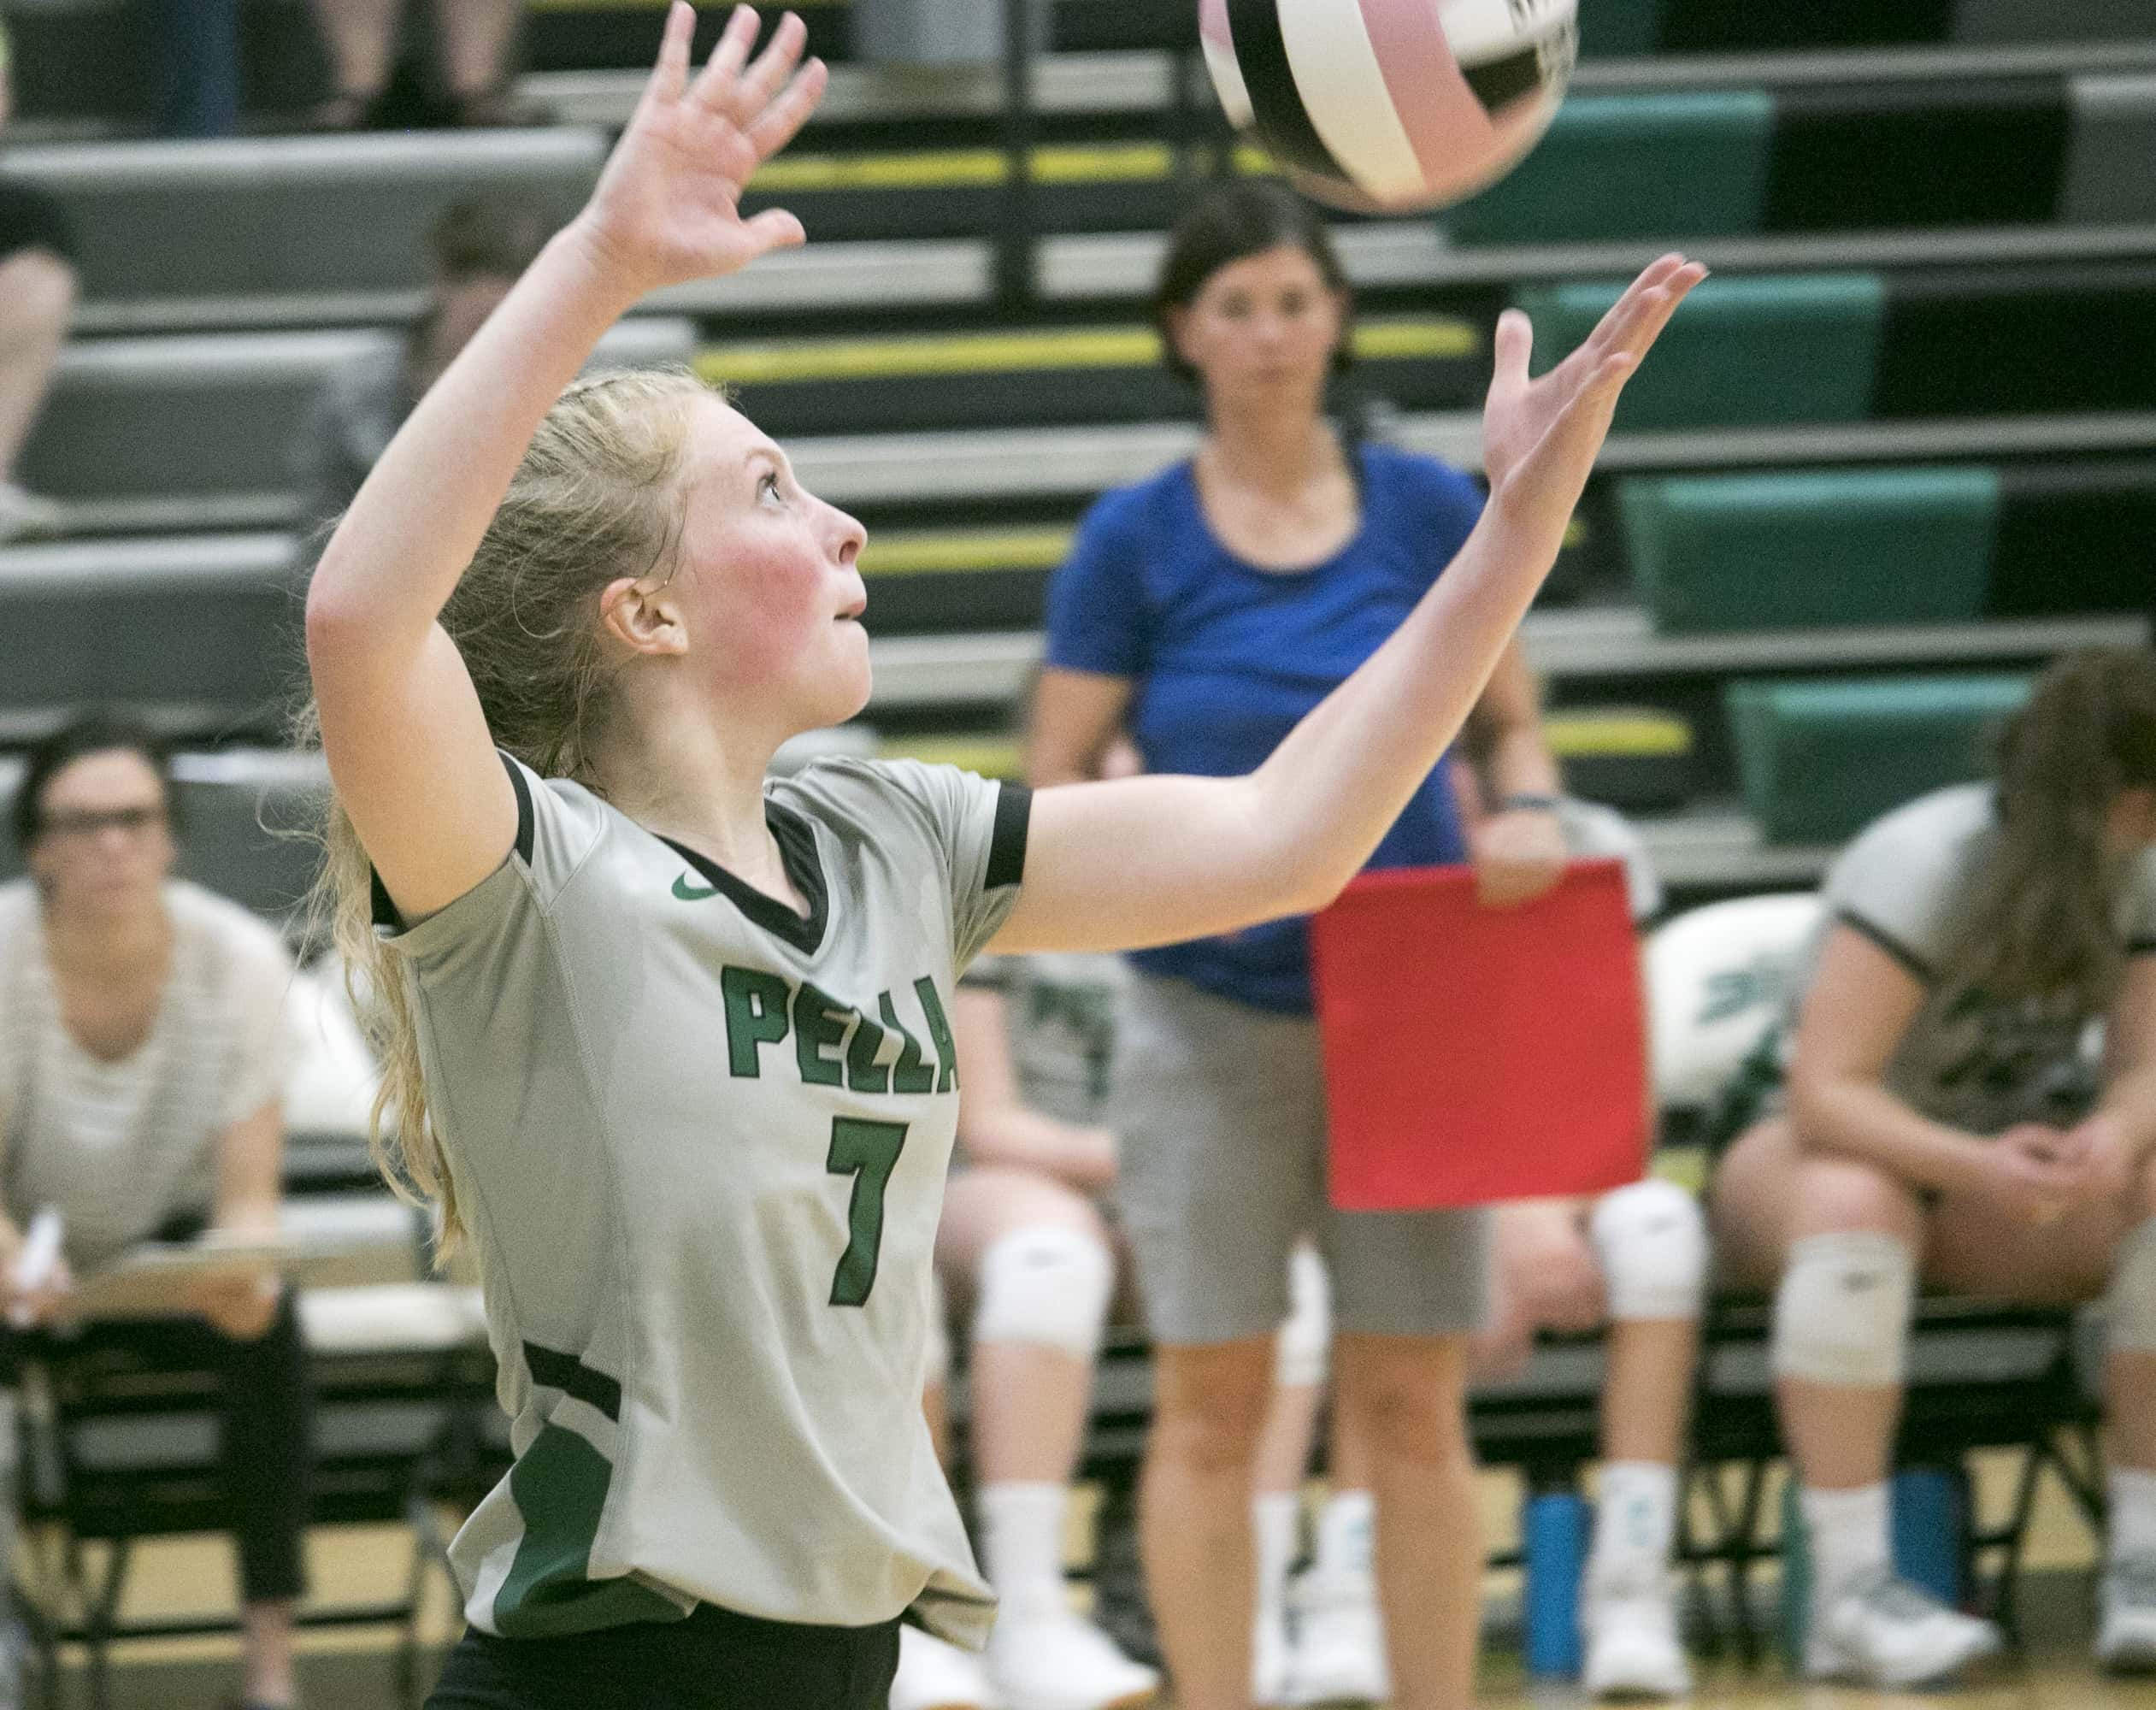 Pella School Board Approves Volleyball Program Structural Changes